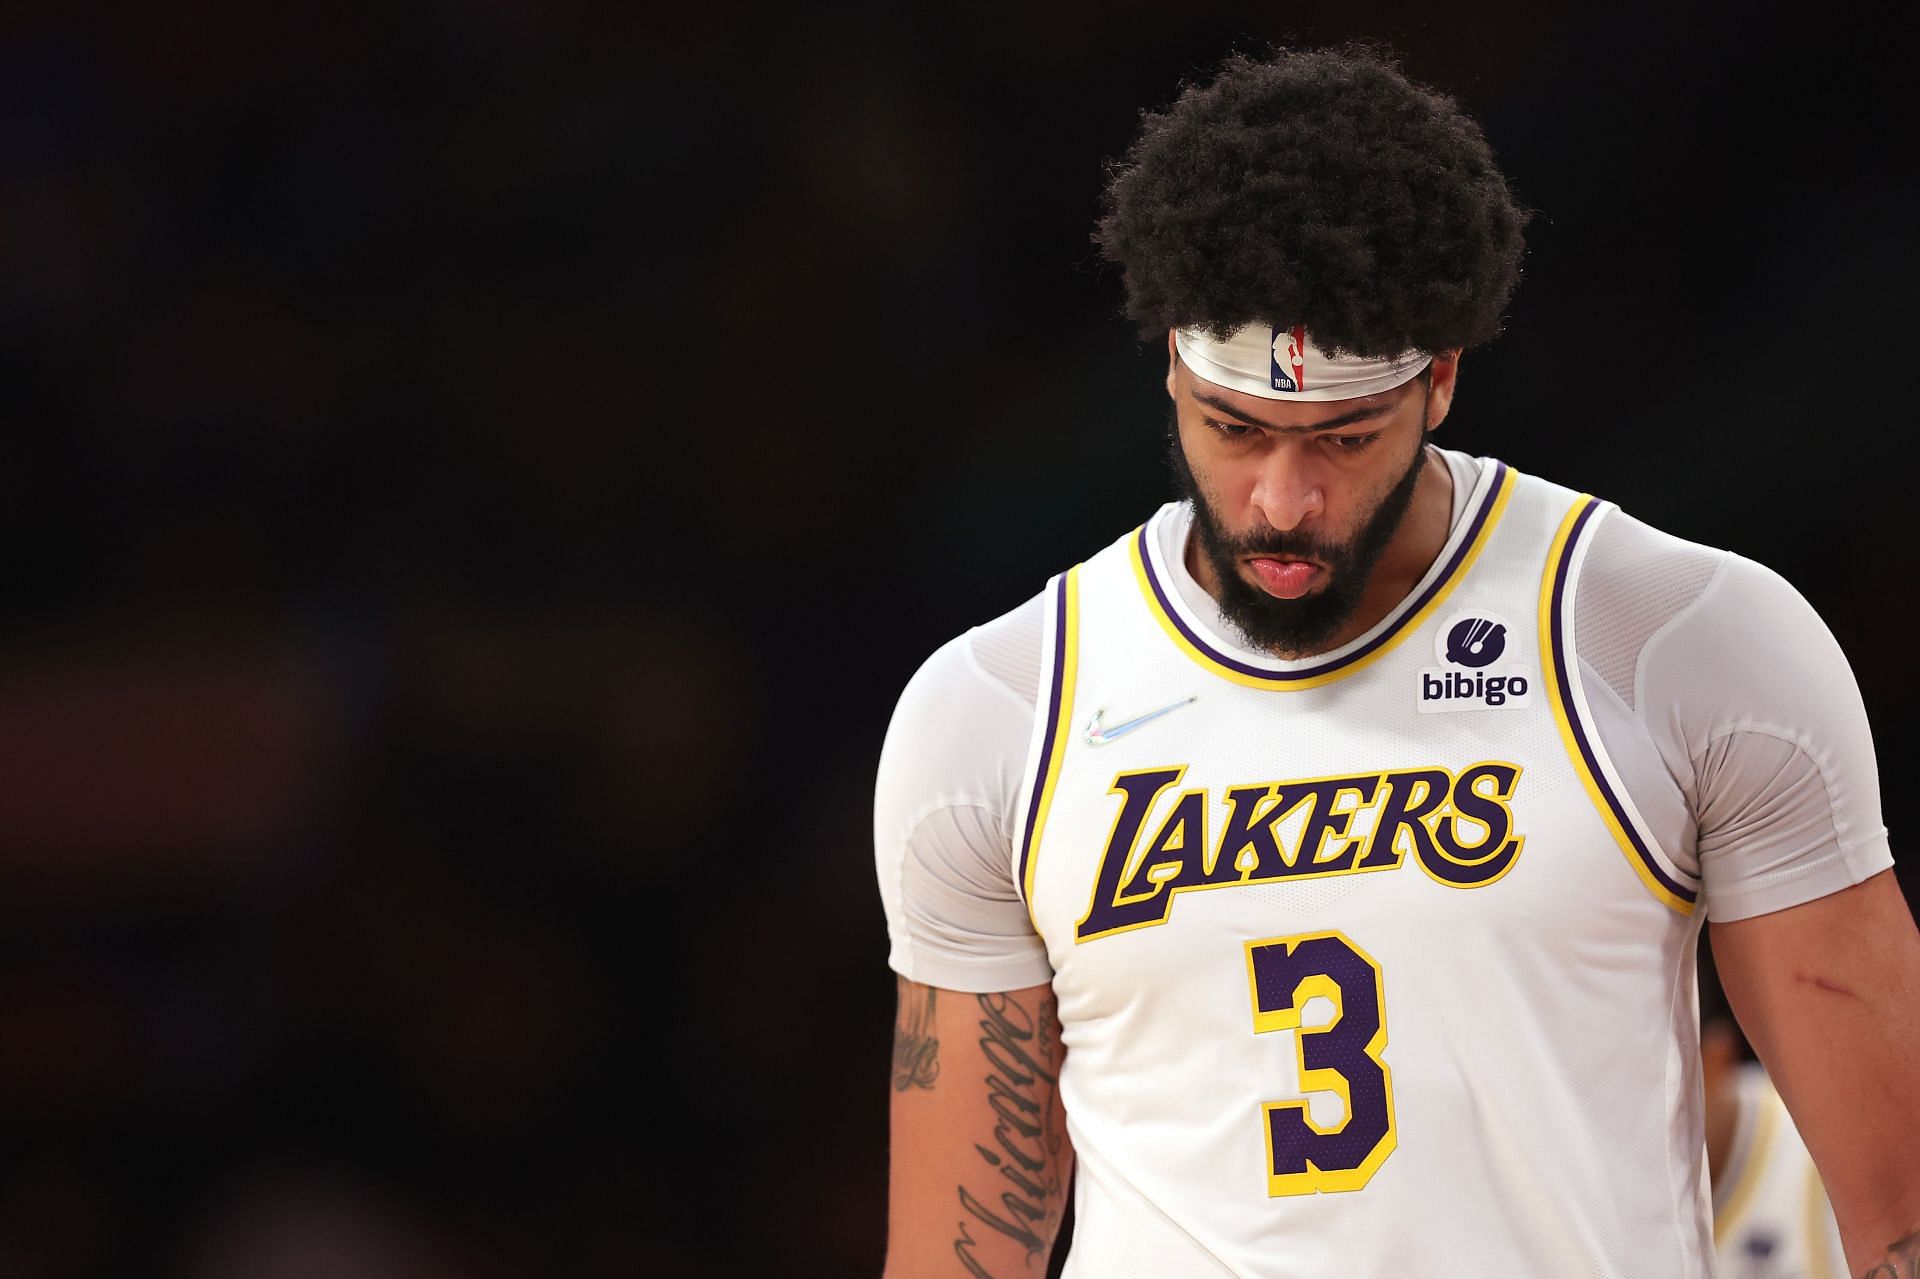 The LA Lakers&#039; season could end in disappointment again if Anthony Davis isn&#039;t fully healthy.